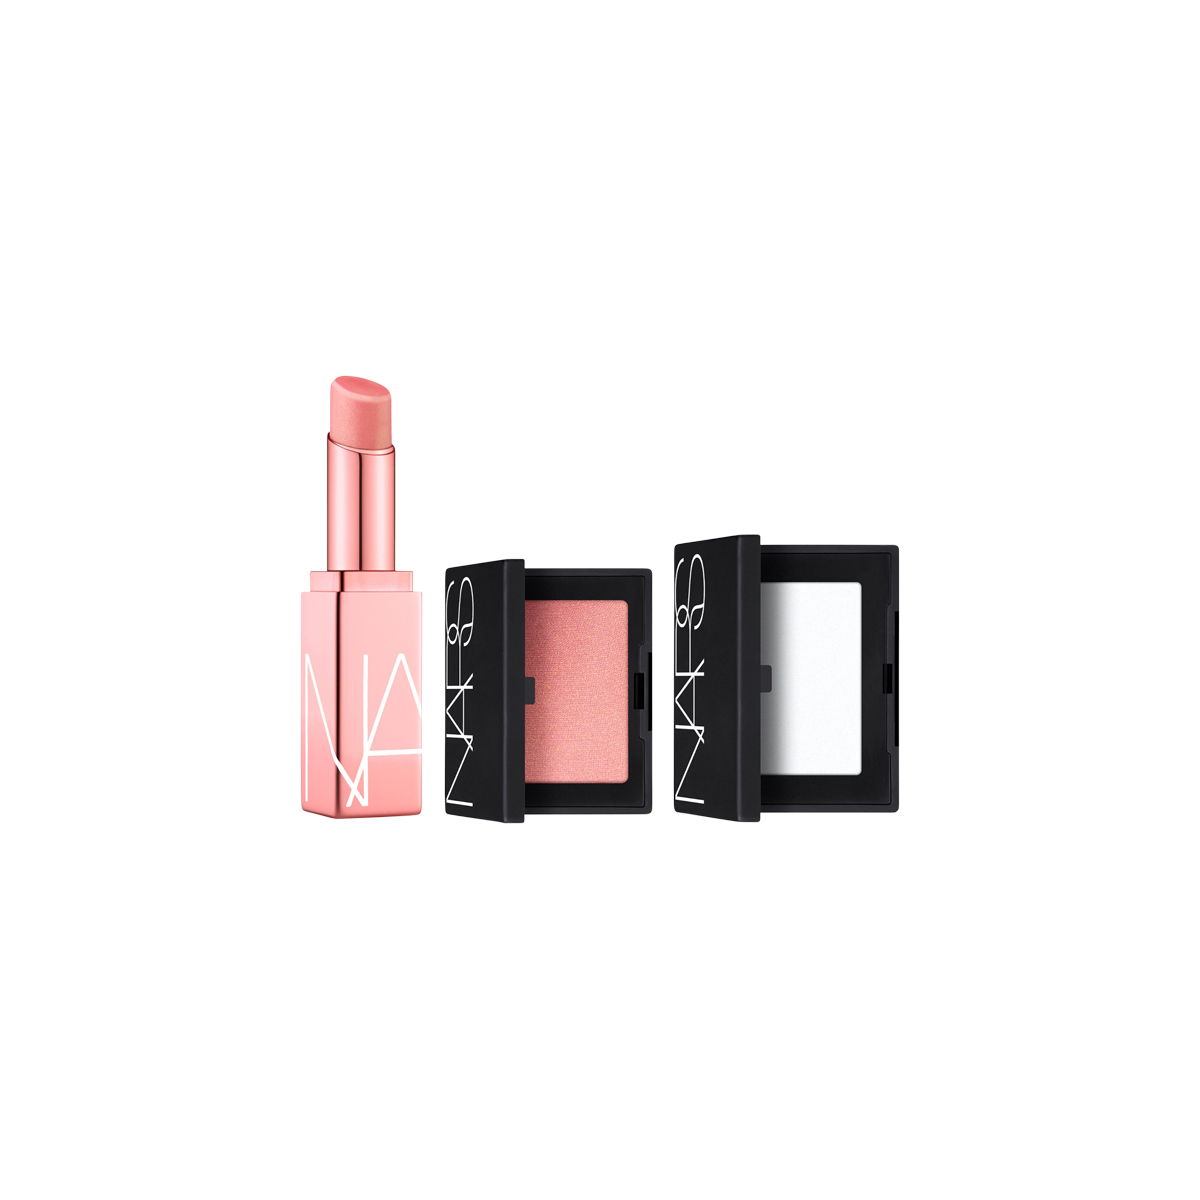 NARS - The Glow Getter Set